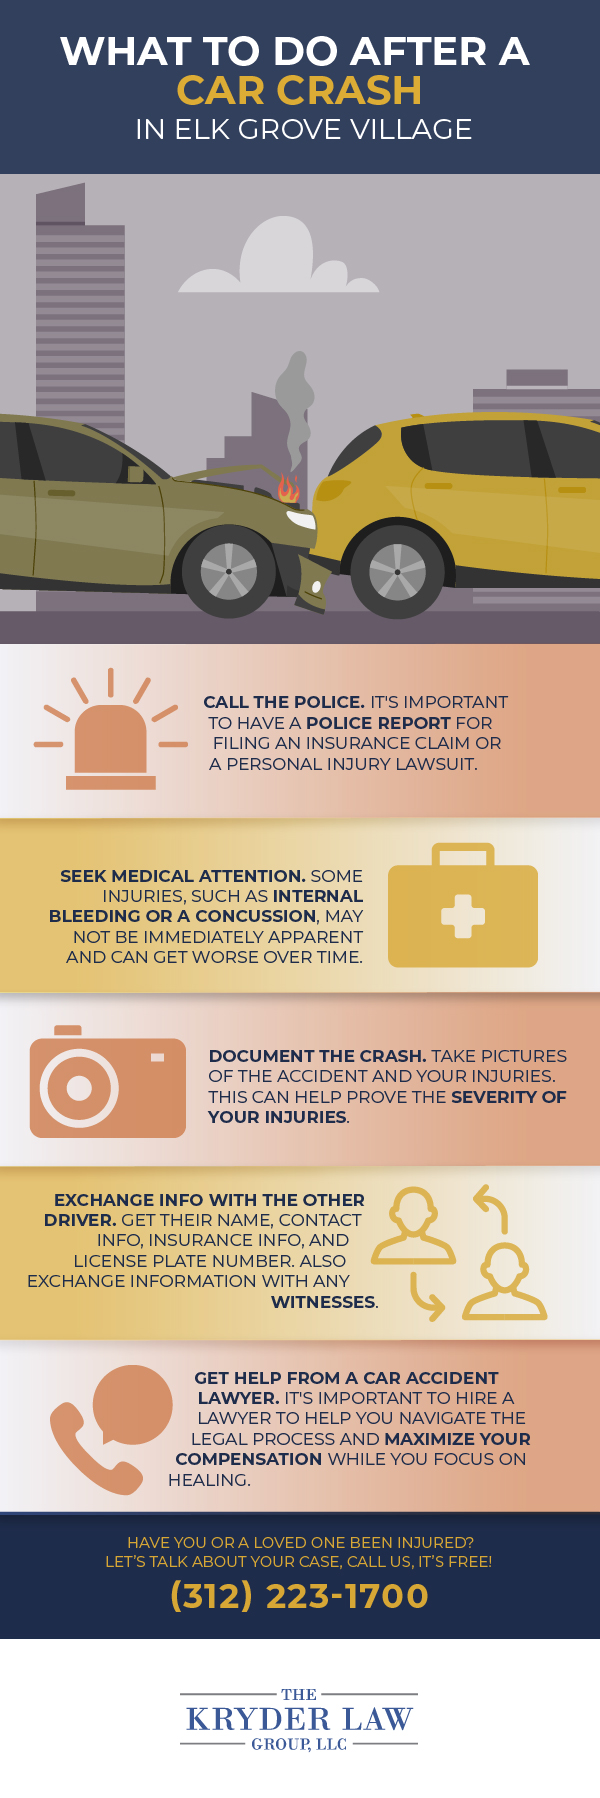 What to Do After a Car Crash in Elk Grove Village